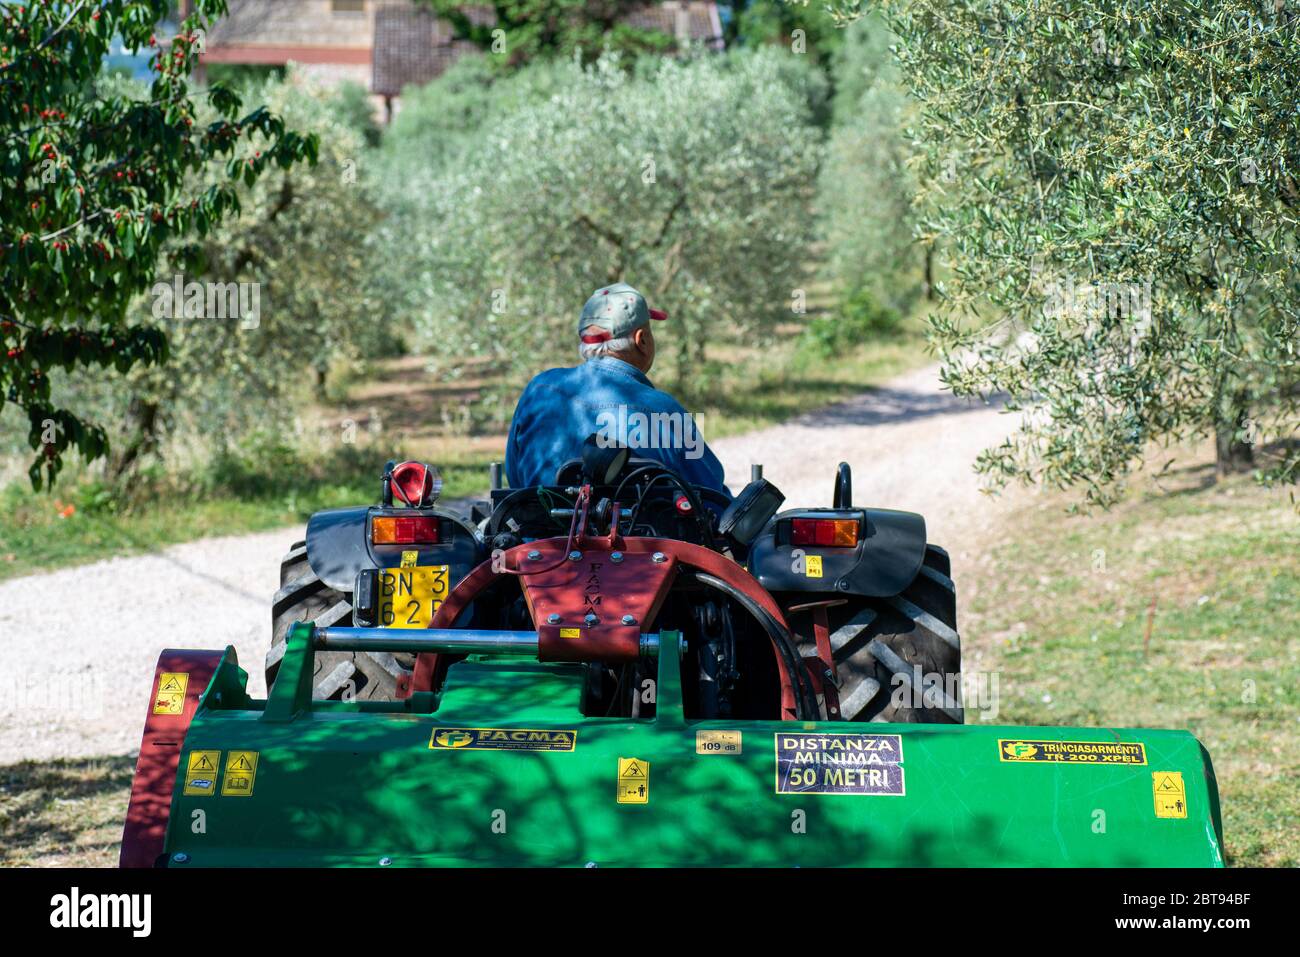 terni, italy may 24 2020:tractor and stalk chopper ready for chopping in the sun Stock Photo